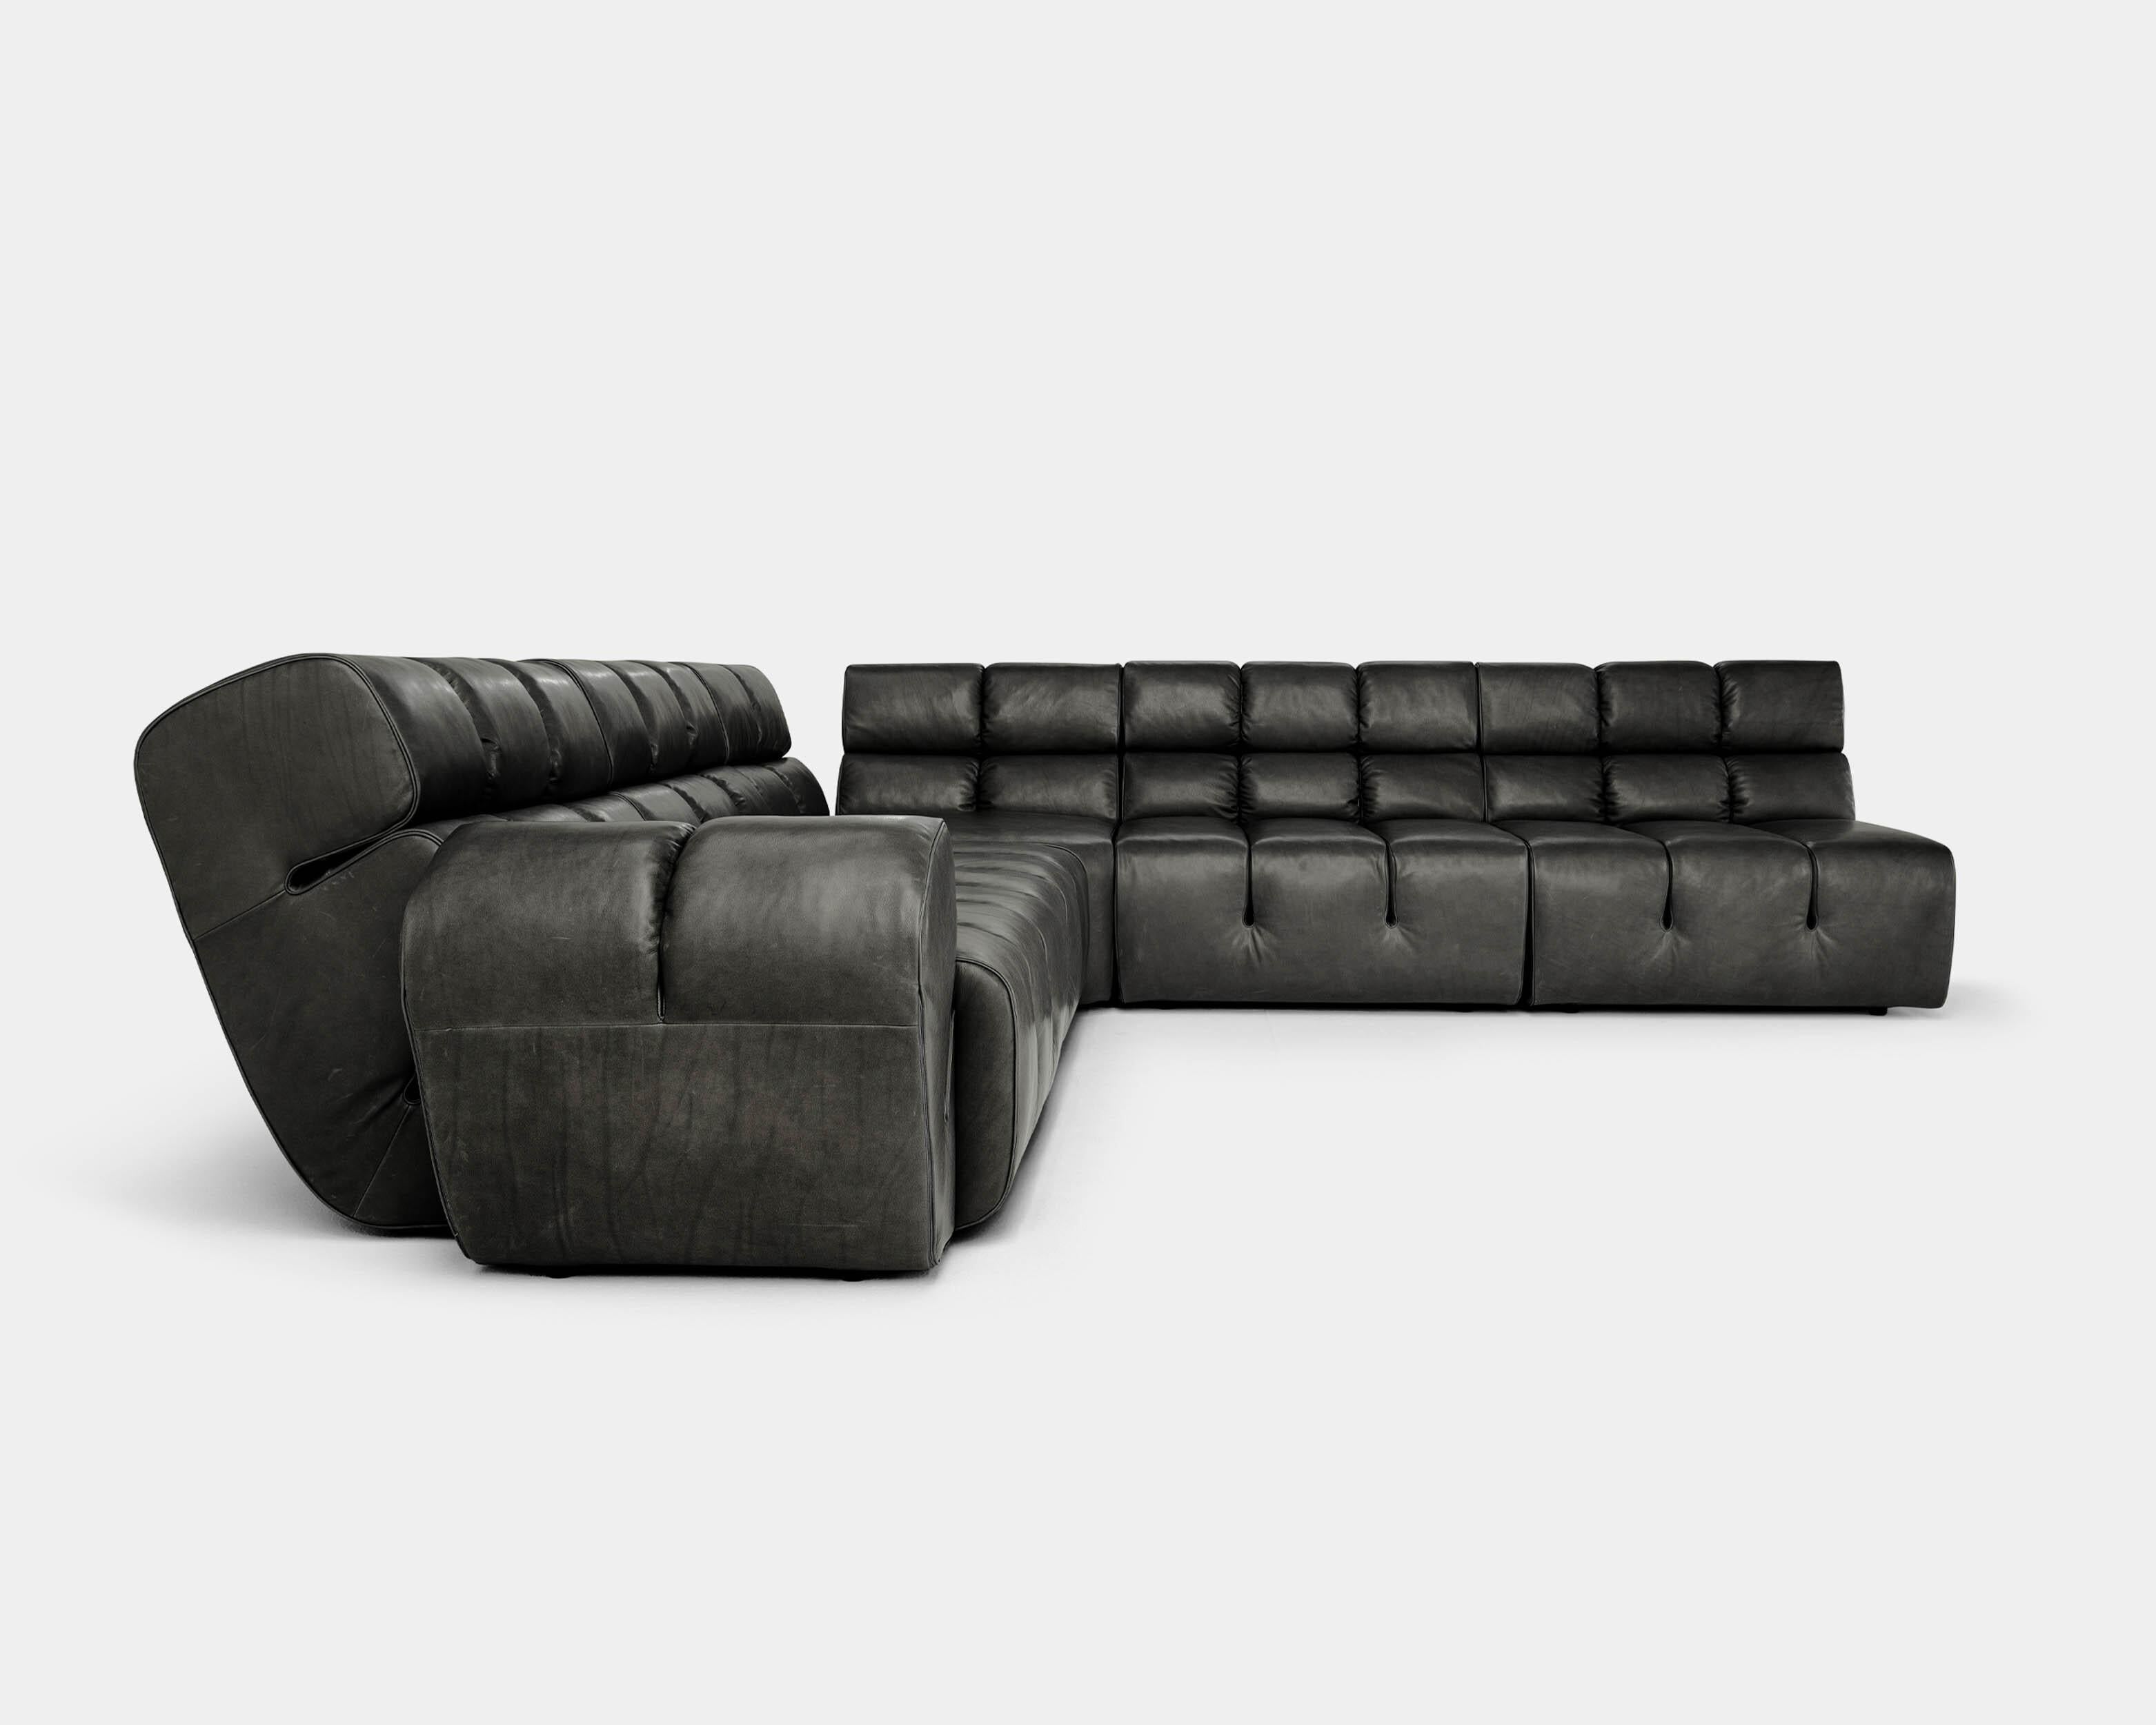 Sectional sofa Palmo by Amura Lab 
Designer: Emanuel Gargano

Model shown: Leather - Stone Wash 263 

Inspired by the natural gesture of an opening hand, Palmo is the new living concept designed by Emanuel Gargano.
The leather folds become the